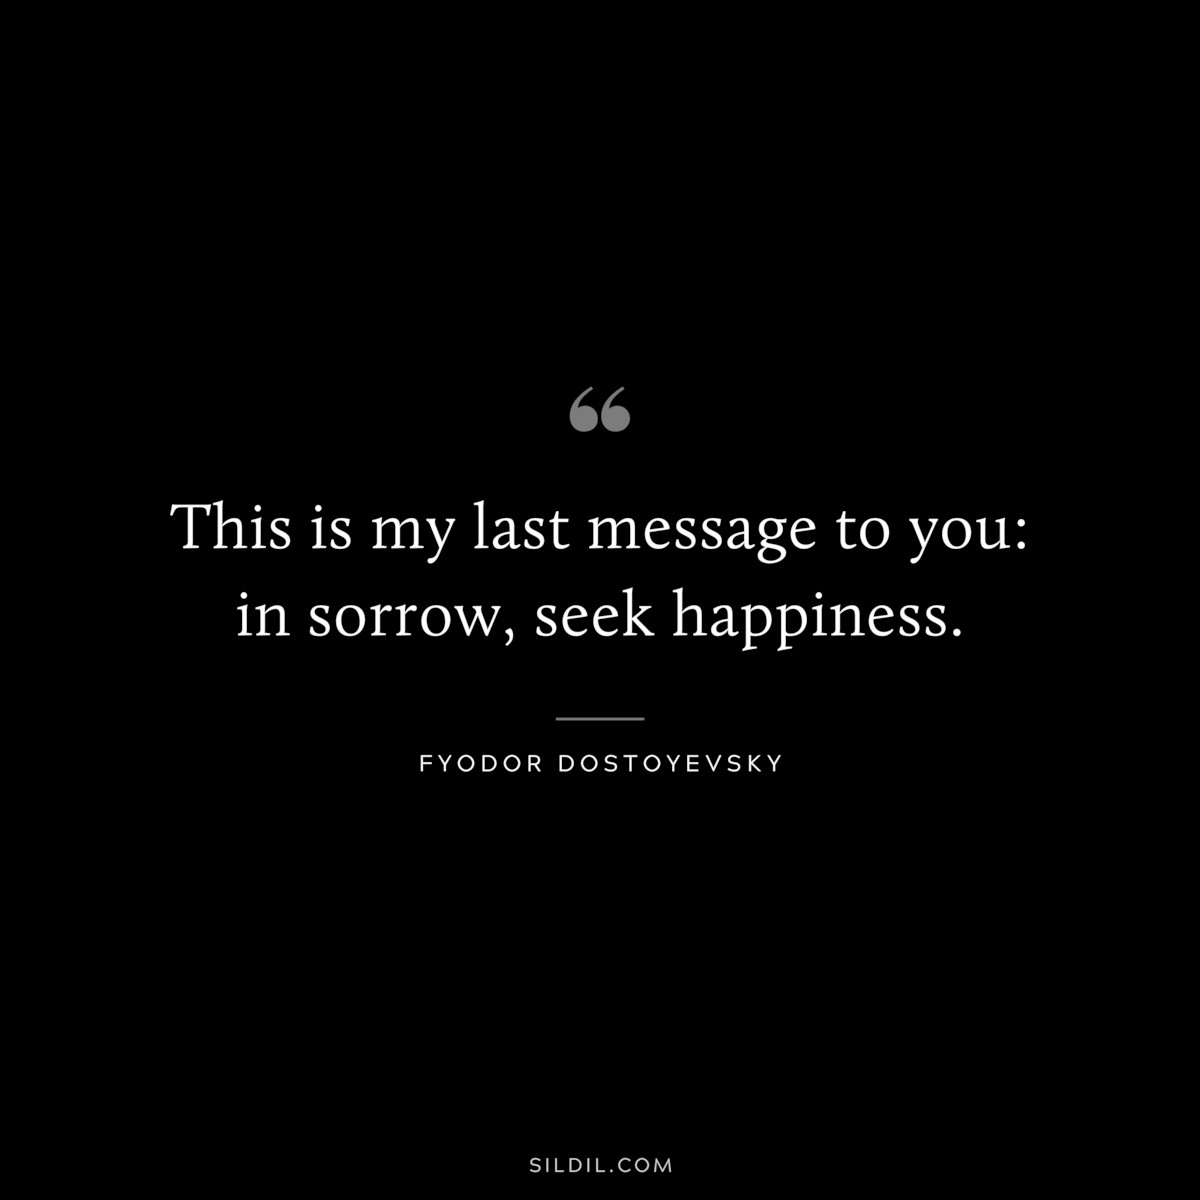 This is my last message to you: in sorrow, seek happiness. ― Fyodor Dostoyevsky